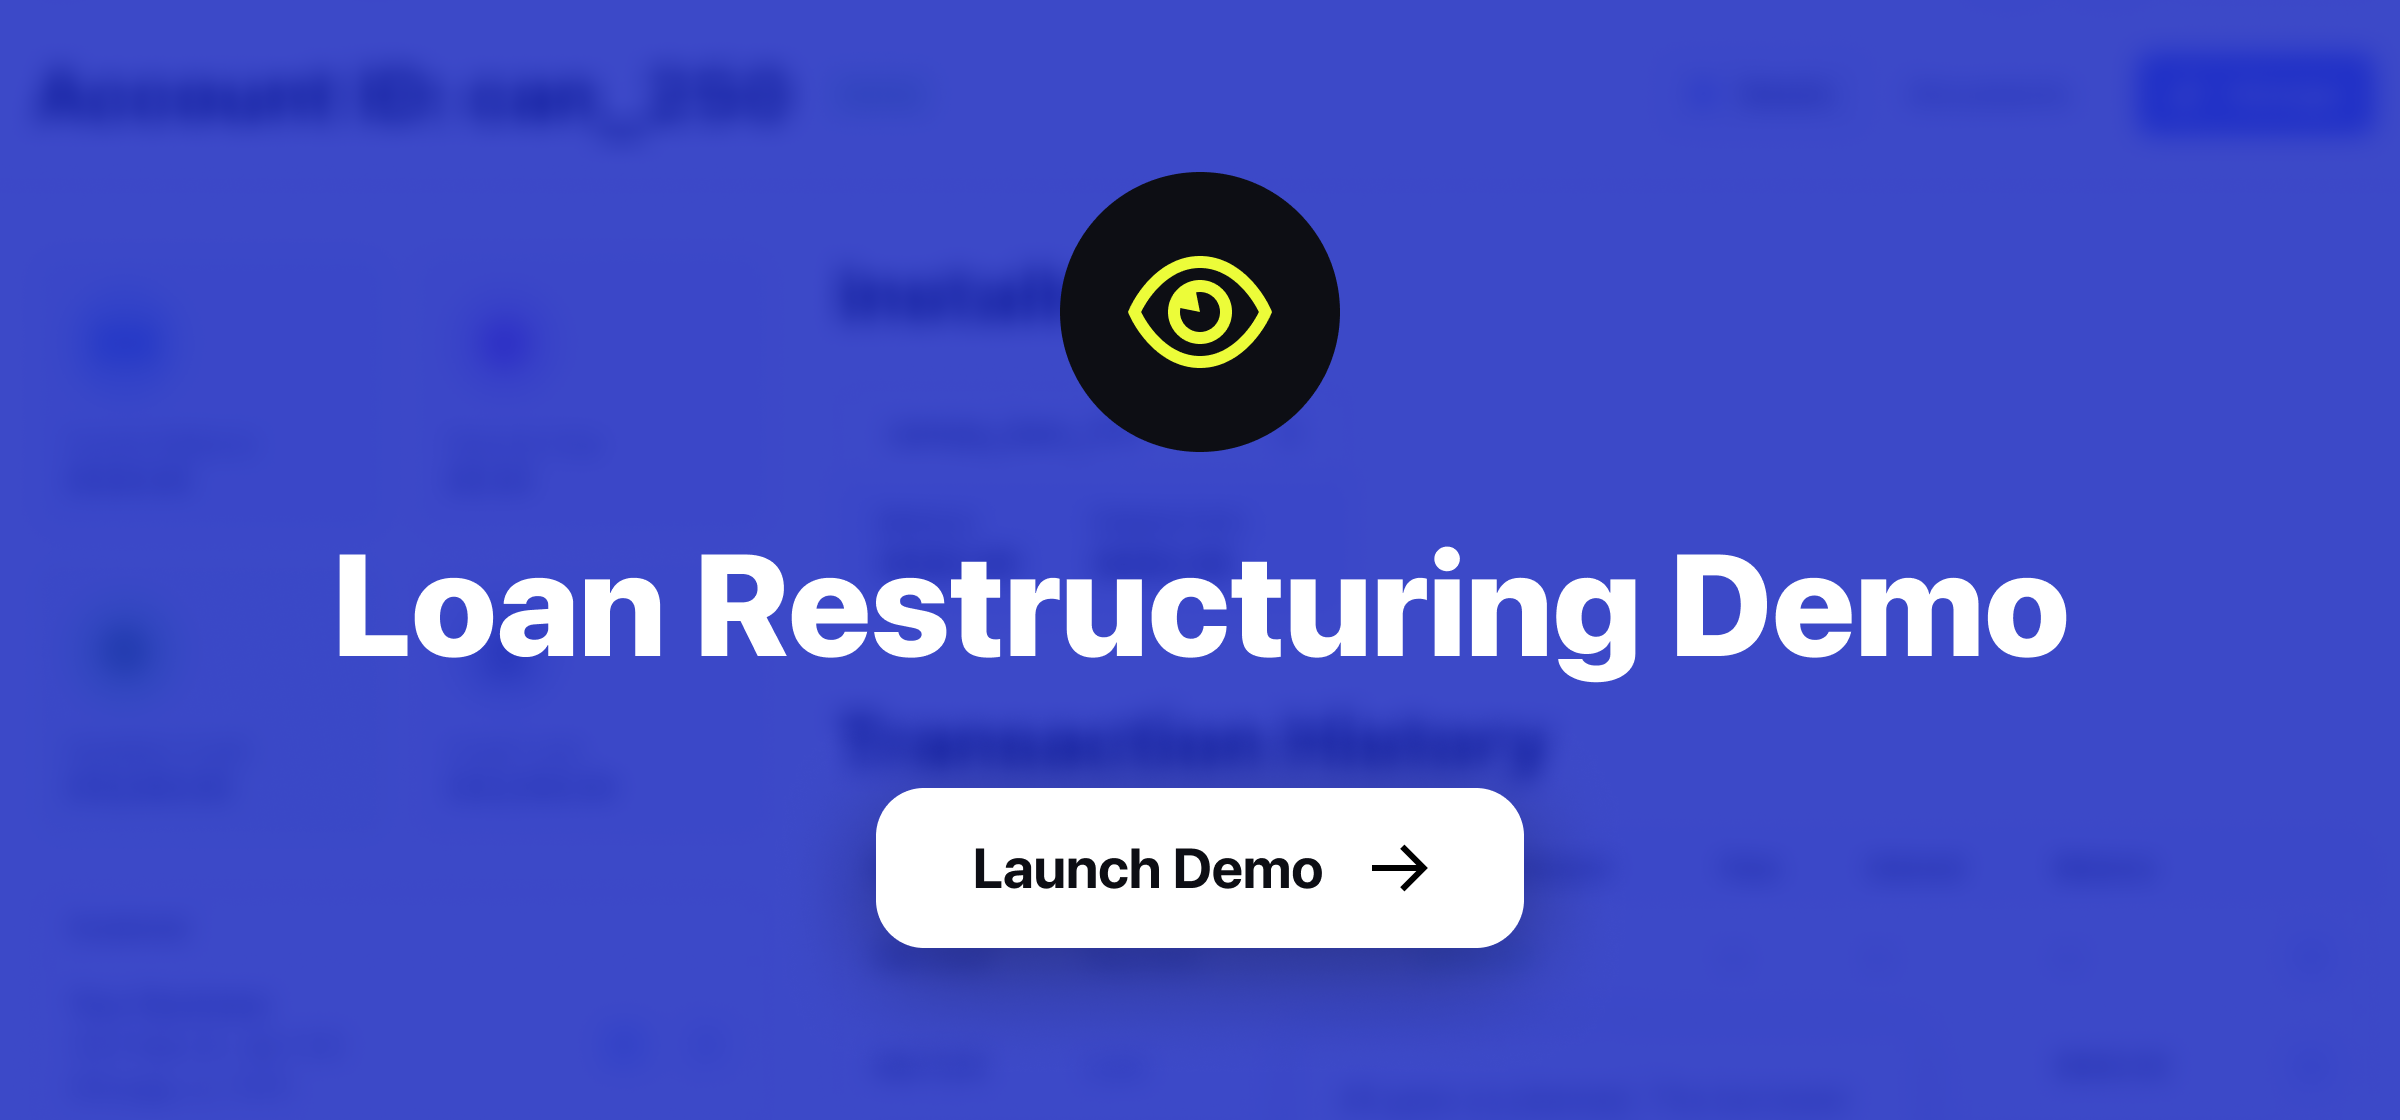 Loan Restructuring Demo